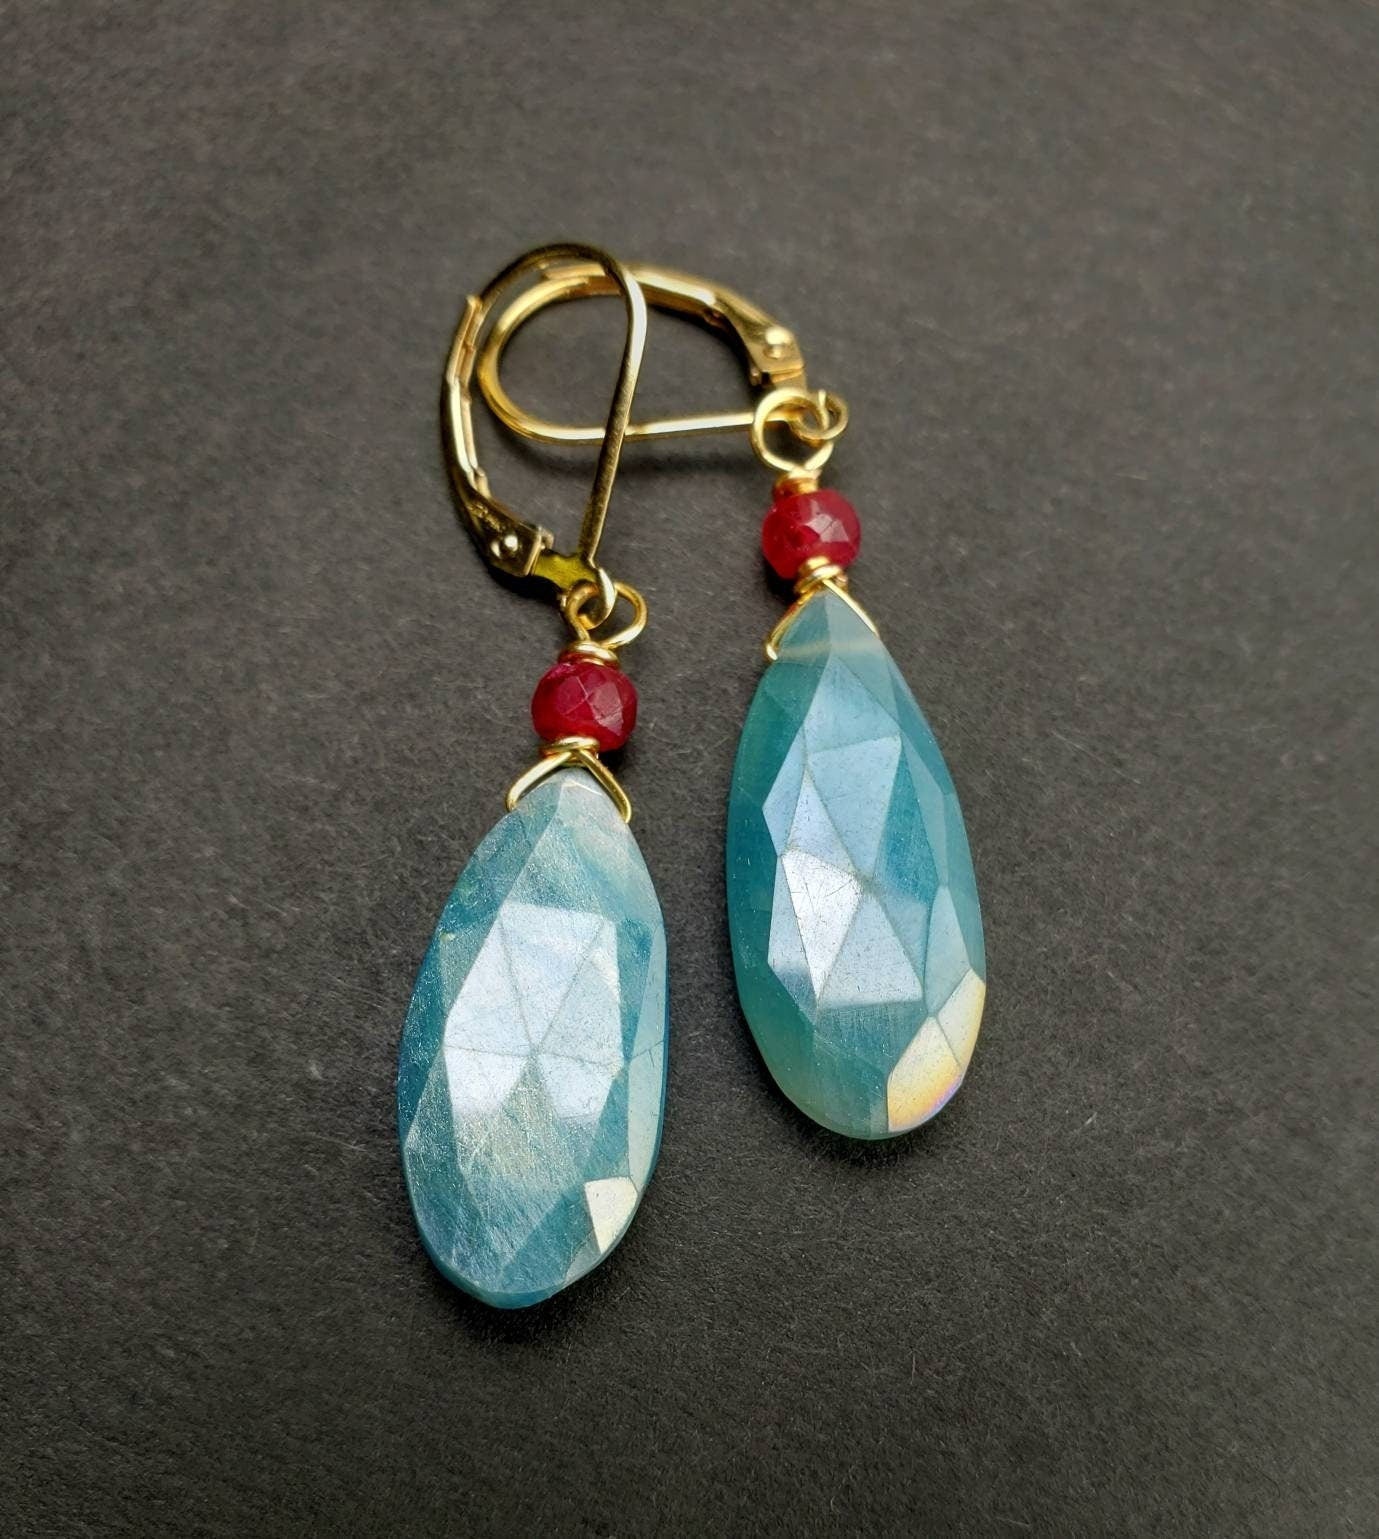 Blue Moonstone Faceted Long Pear Drop 10x21mmWire Wrapped, 4mm Genuine ruby accent 14k Gold Filled or 925 sterling Earring, Elegant Gift